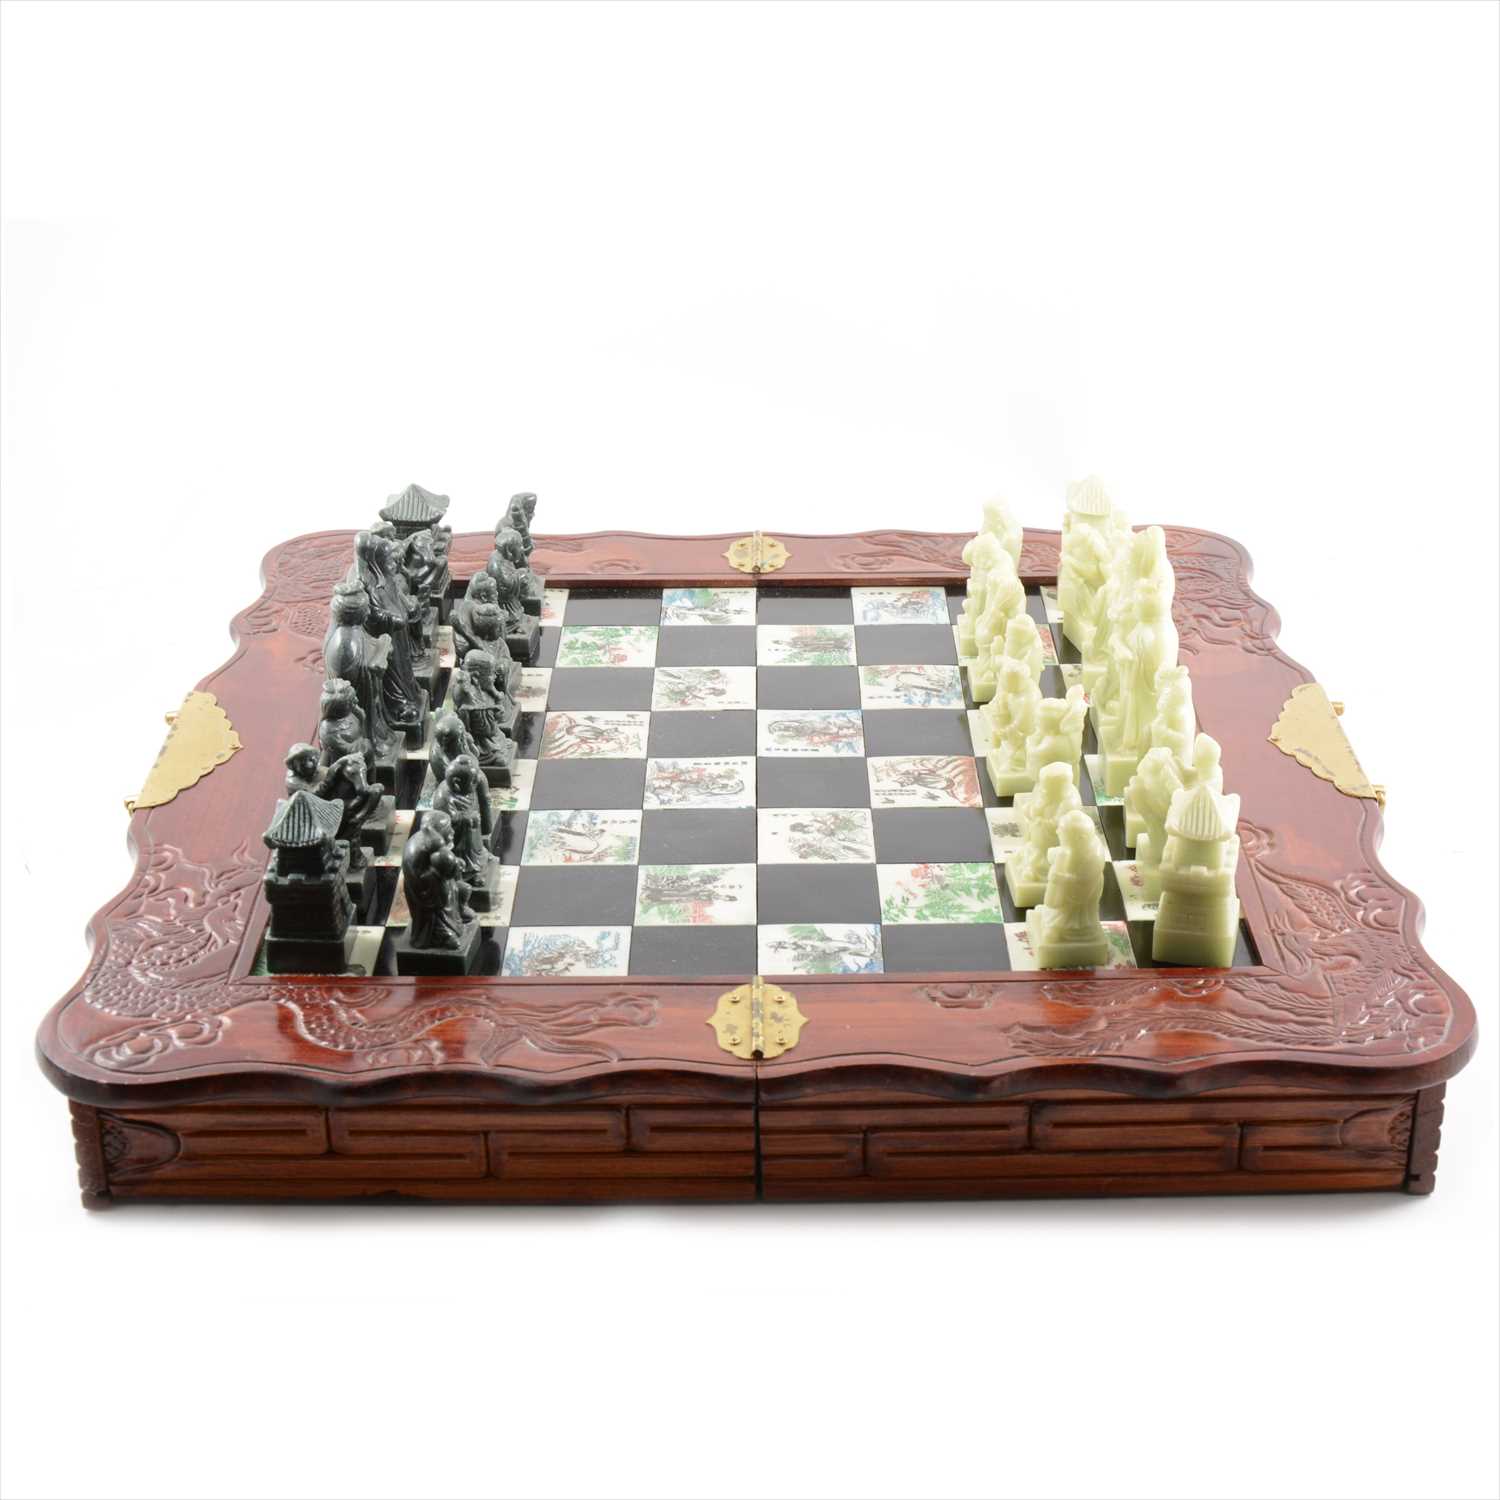 Lot 116 - Modern Chinese chessboard, porcelain chequerboard with simulated carved figural chess pieces.